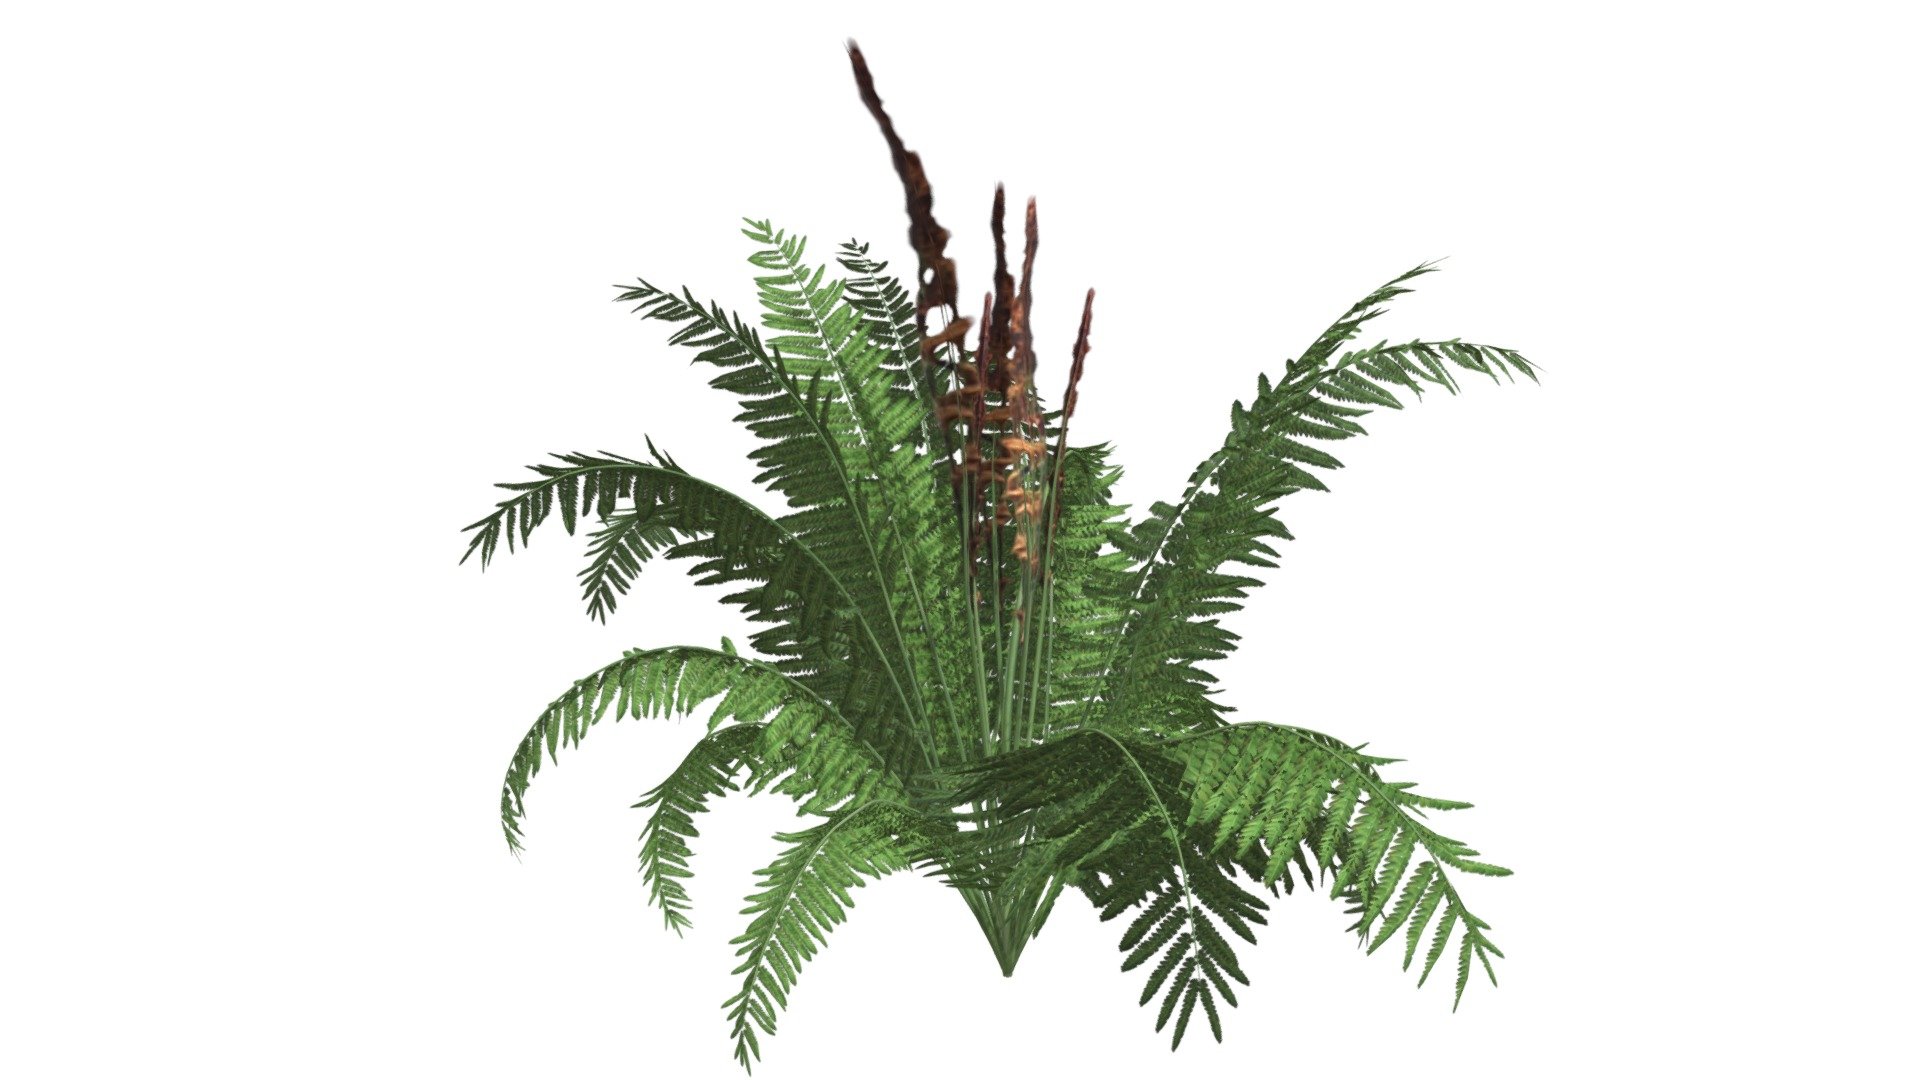 This 3D model of the Cinnamon Fern Plant is a highly detailed and photorealistic option suitable for architectural, landscaping, and video game projects. The model is designed with carefully crafted textures that mimic the natural beauty of a real Cinnamon Fern Plant. Its versatility allows it to bring a touch of realism to any project, whether it's a small architectural rendering or a large-scale landscape design. Additionally, the model is optimized for performance and features efficient UV mapping. This photorealistic 3D model is the perfect solution for architects, landscapers, and game developers who want to enhance the visual experience of their project with a highly detailed, photorealistic Cinnamon Fern Plant 3d model